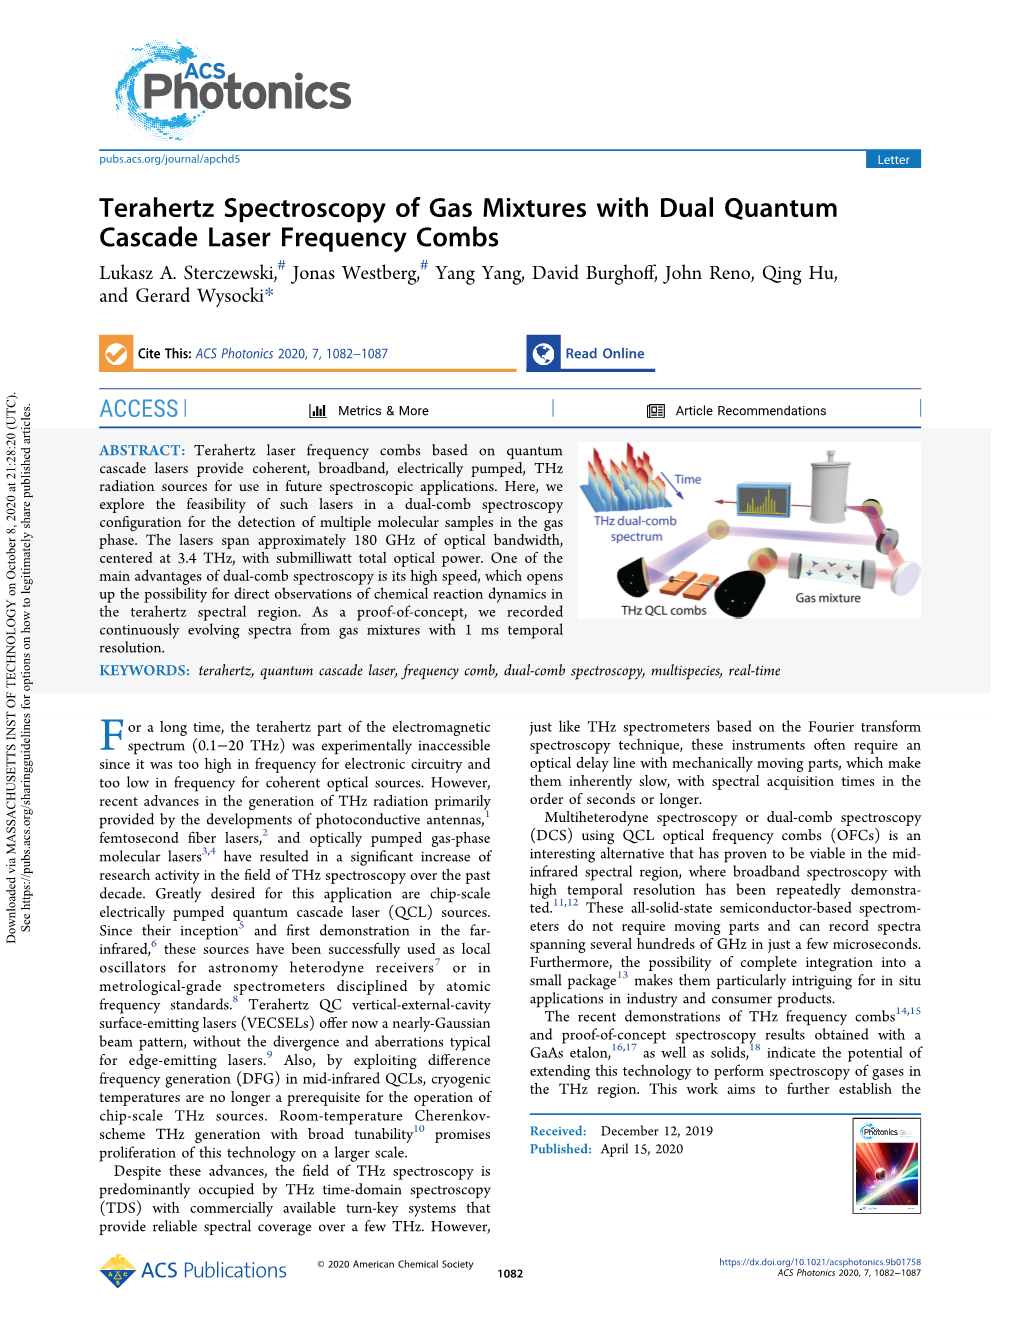 Terahertz Spectroscopy of Gas Mixtures with Dual Quantum Cascade Laser Frequency Combs # # Lukasz A